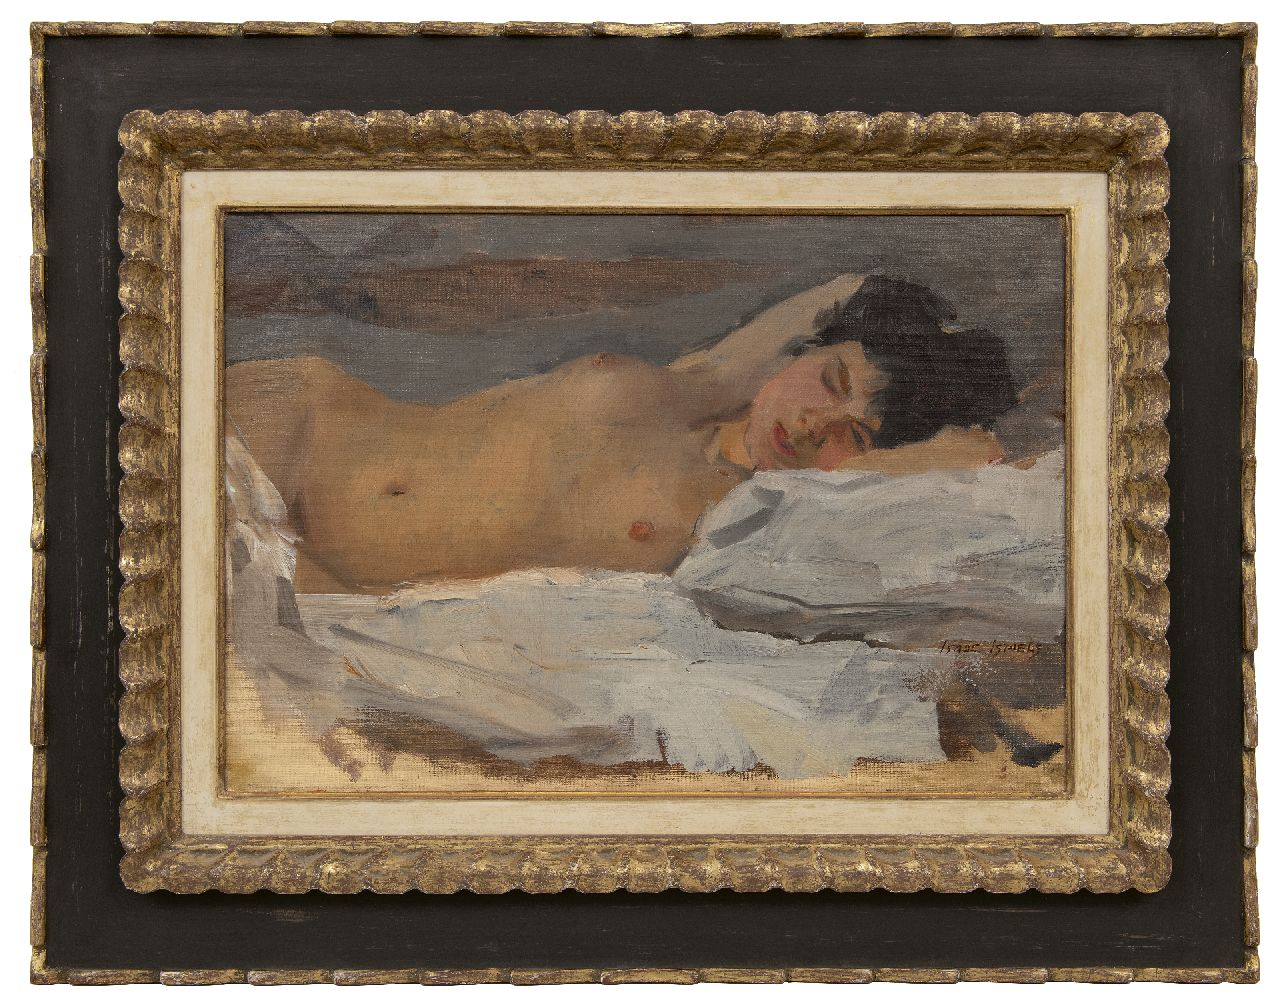 Israels I.L.  | 'Isaac' Lazarus Israels, Sleaping nude, oil on canvas 38.1 x 55.1 cm, signed l.r. and painted between 1915-1920